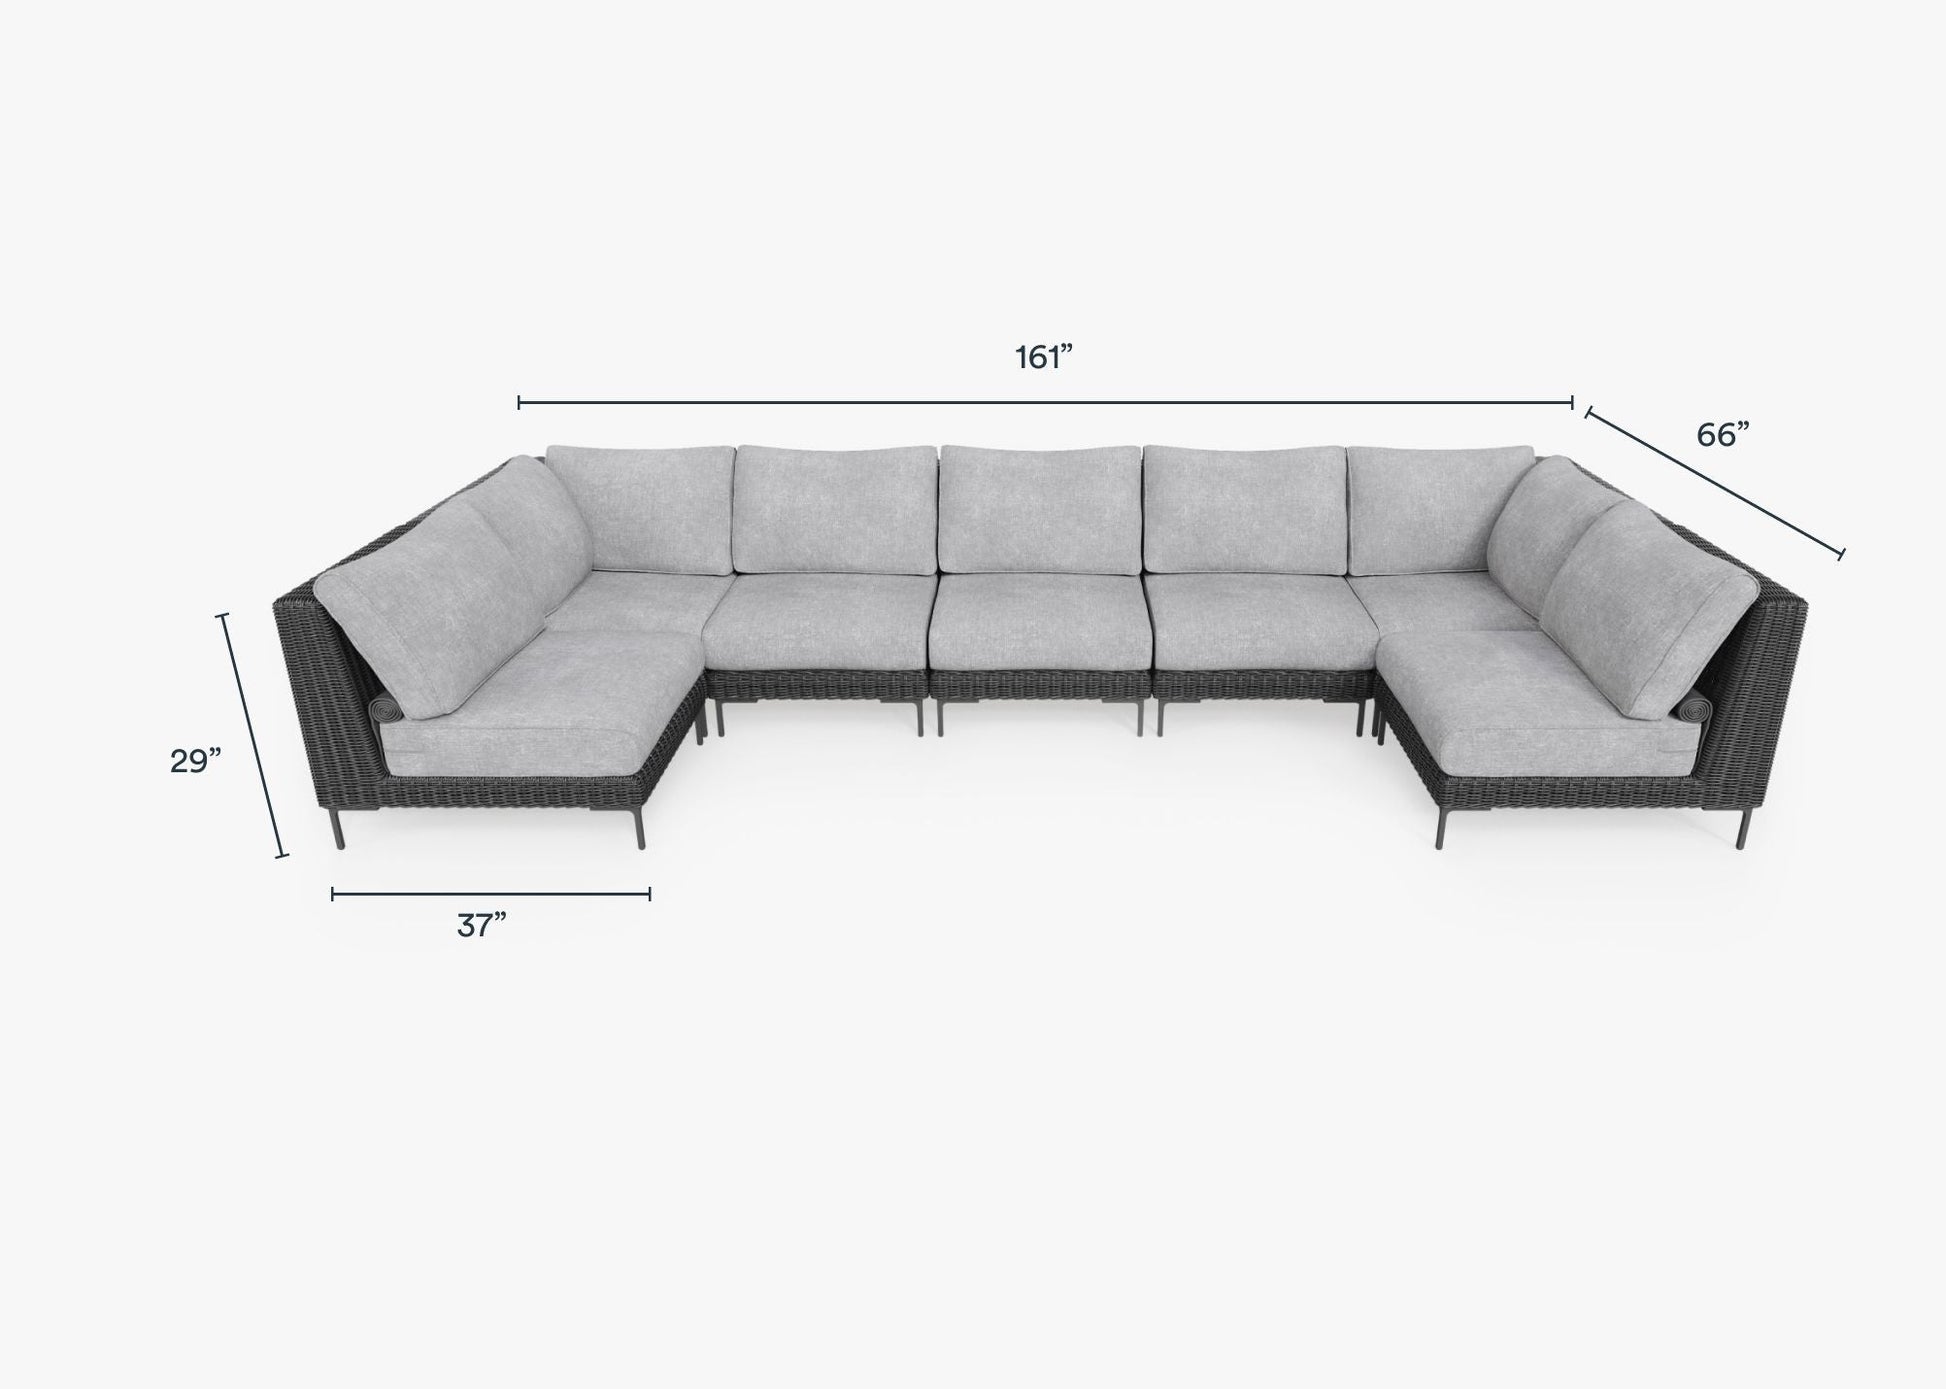 Live Outer 161" x 66" Black Wicker Outdoor U Sectional 7-Seat With Pacific Fog Gray Cushion